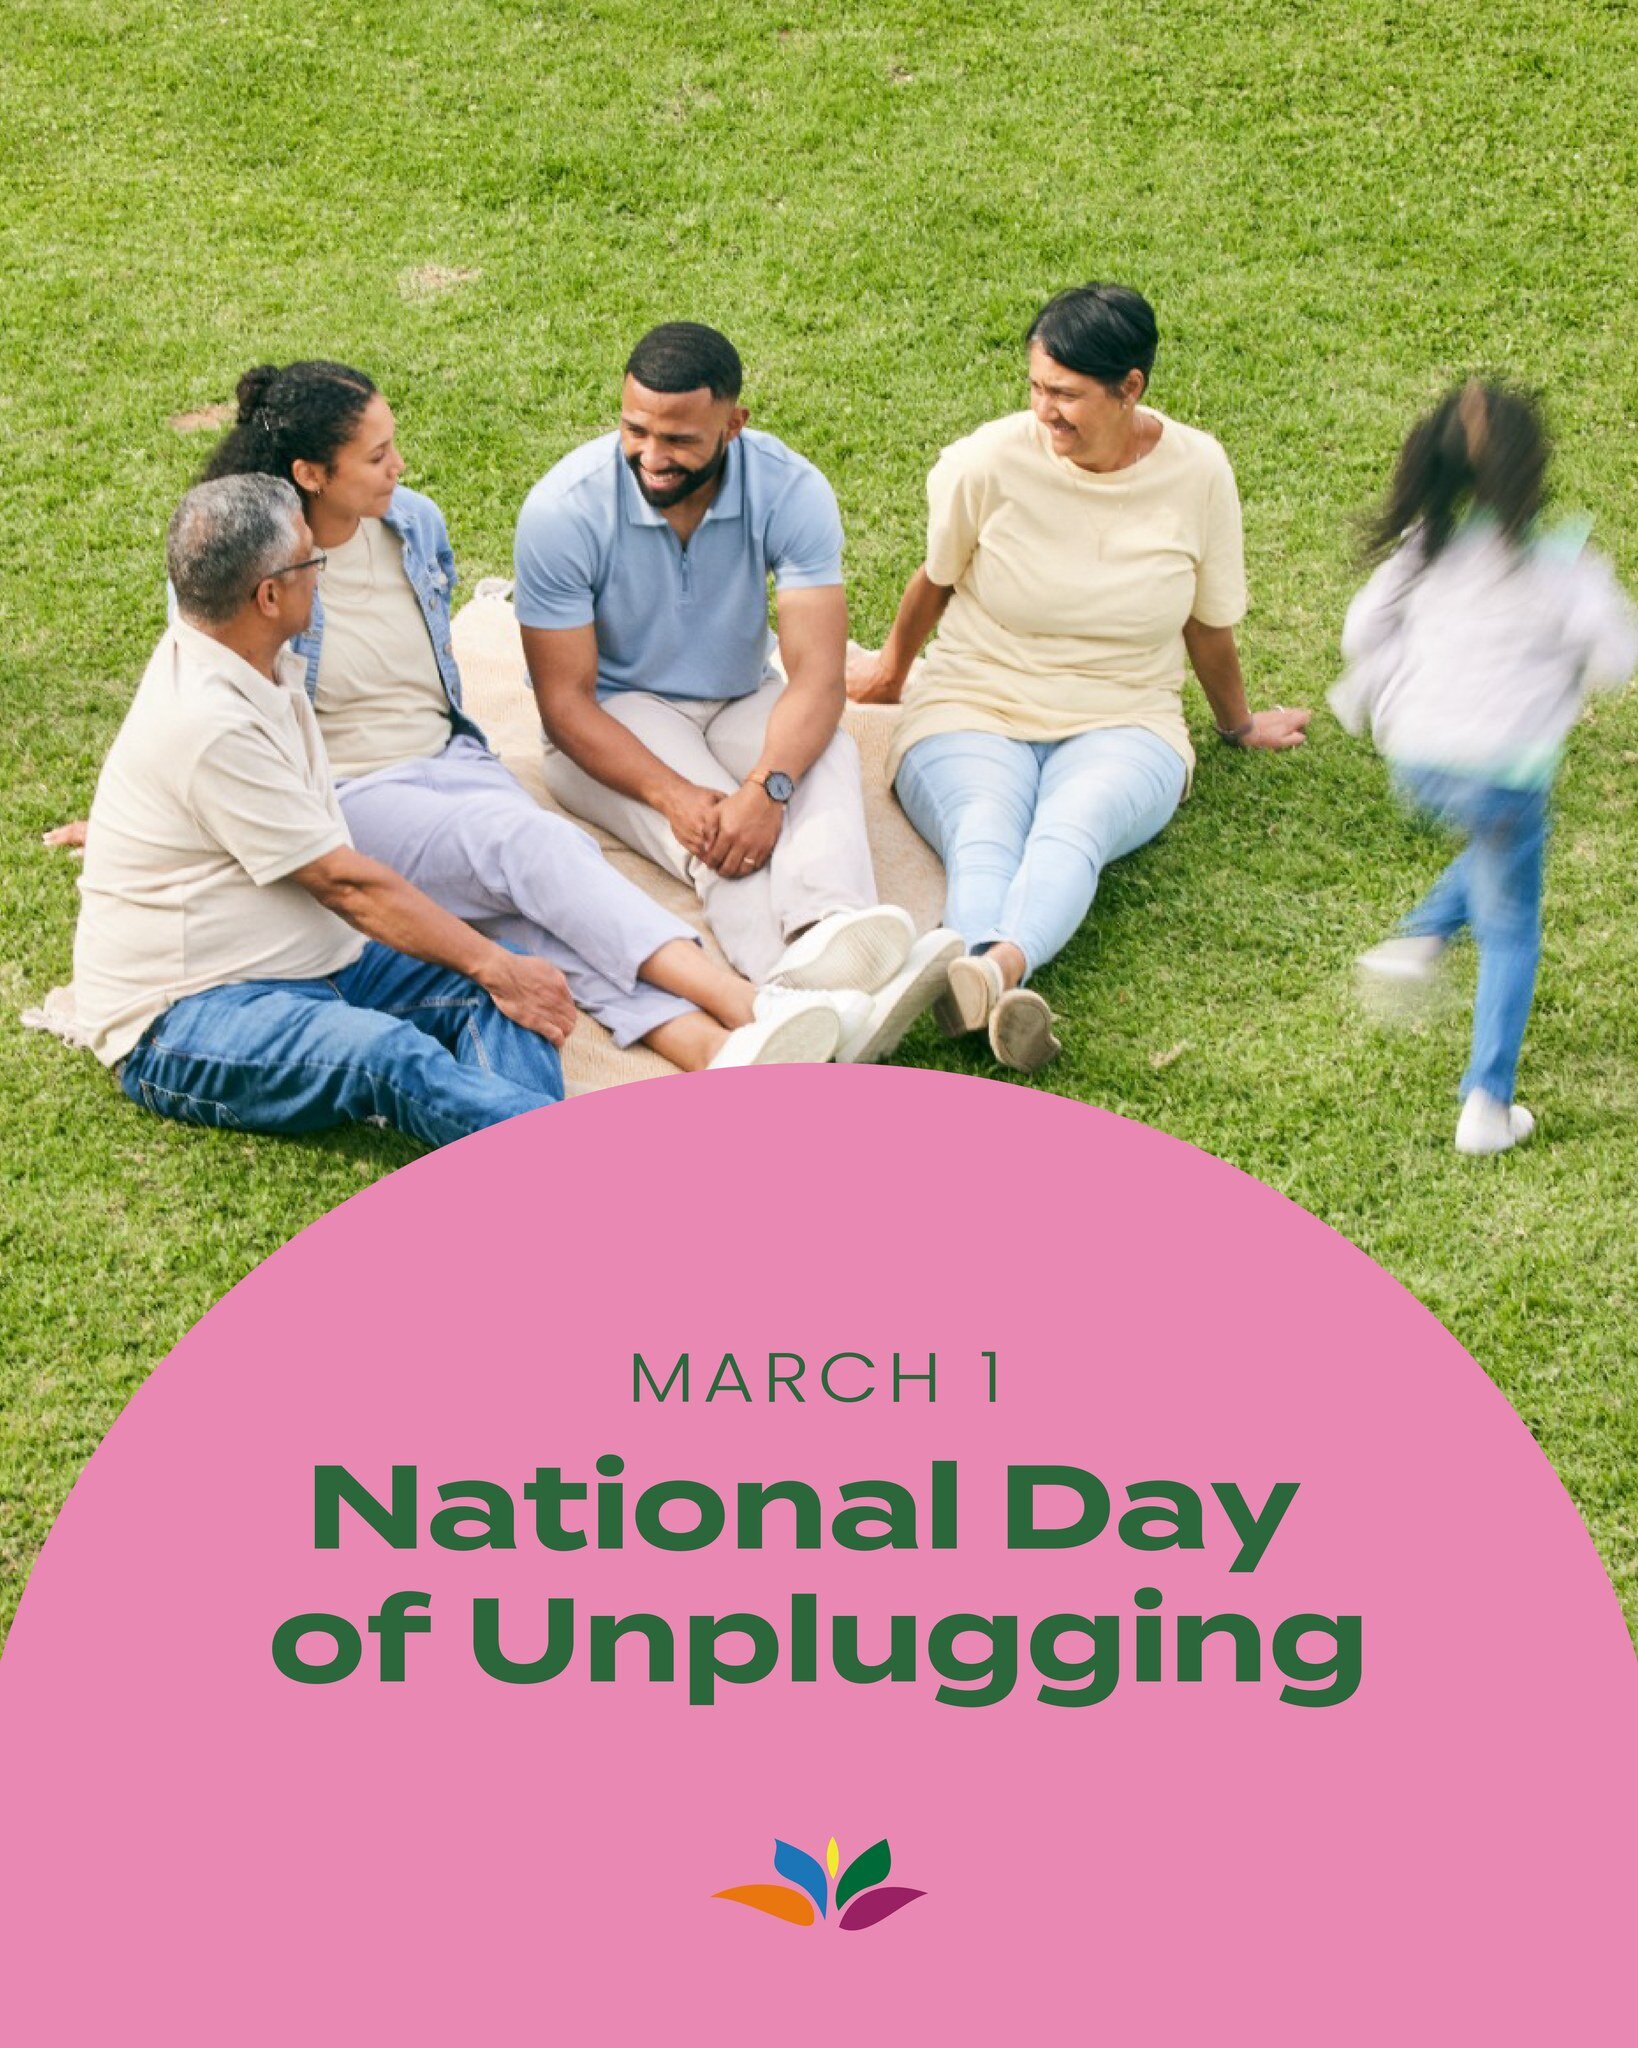 Today is National Day of Unplugging! 📵 Disconnect to reconnect! Let's take a break from our screens and experience the benefits firsthand:

✨ Reduced stress and anxiety
✨ Improved focus and presence
✨ Enhanced real-life relationships
✨ Increased min